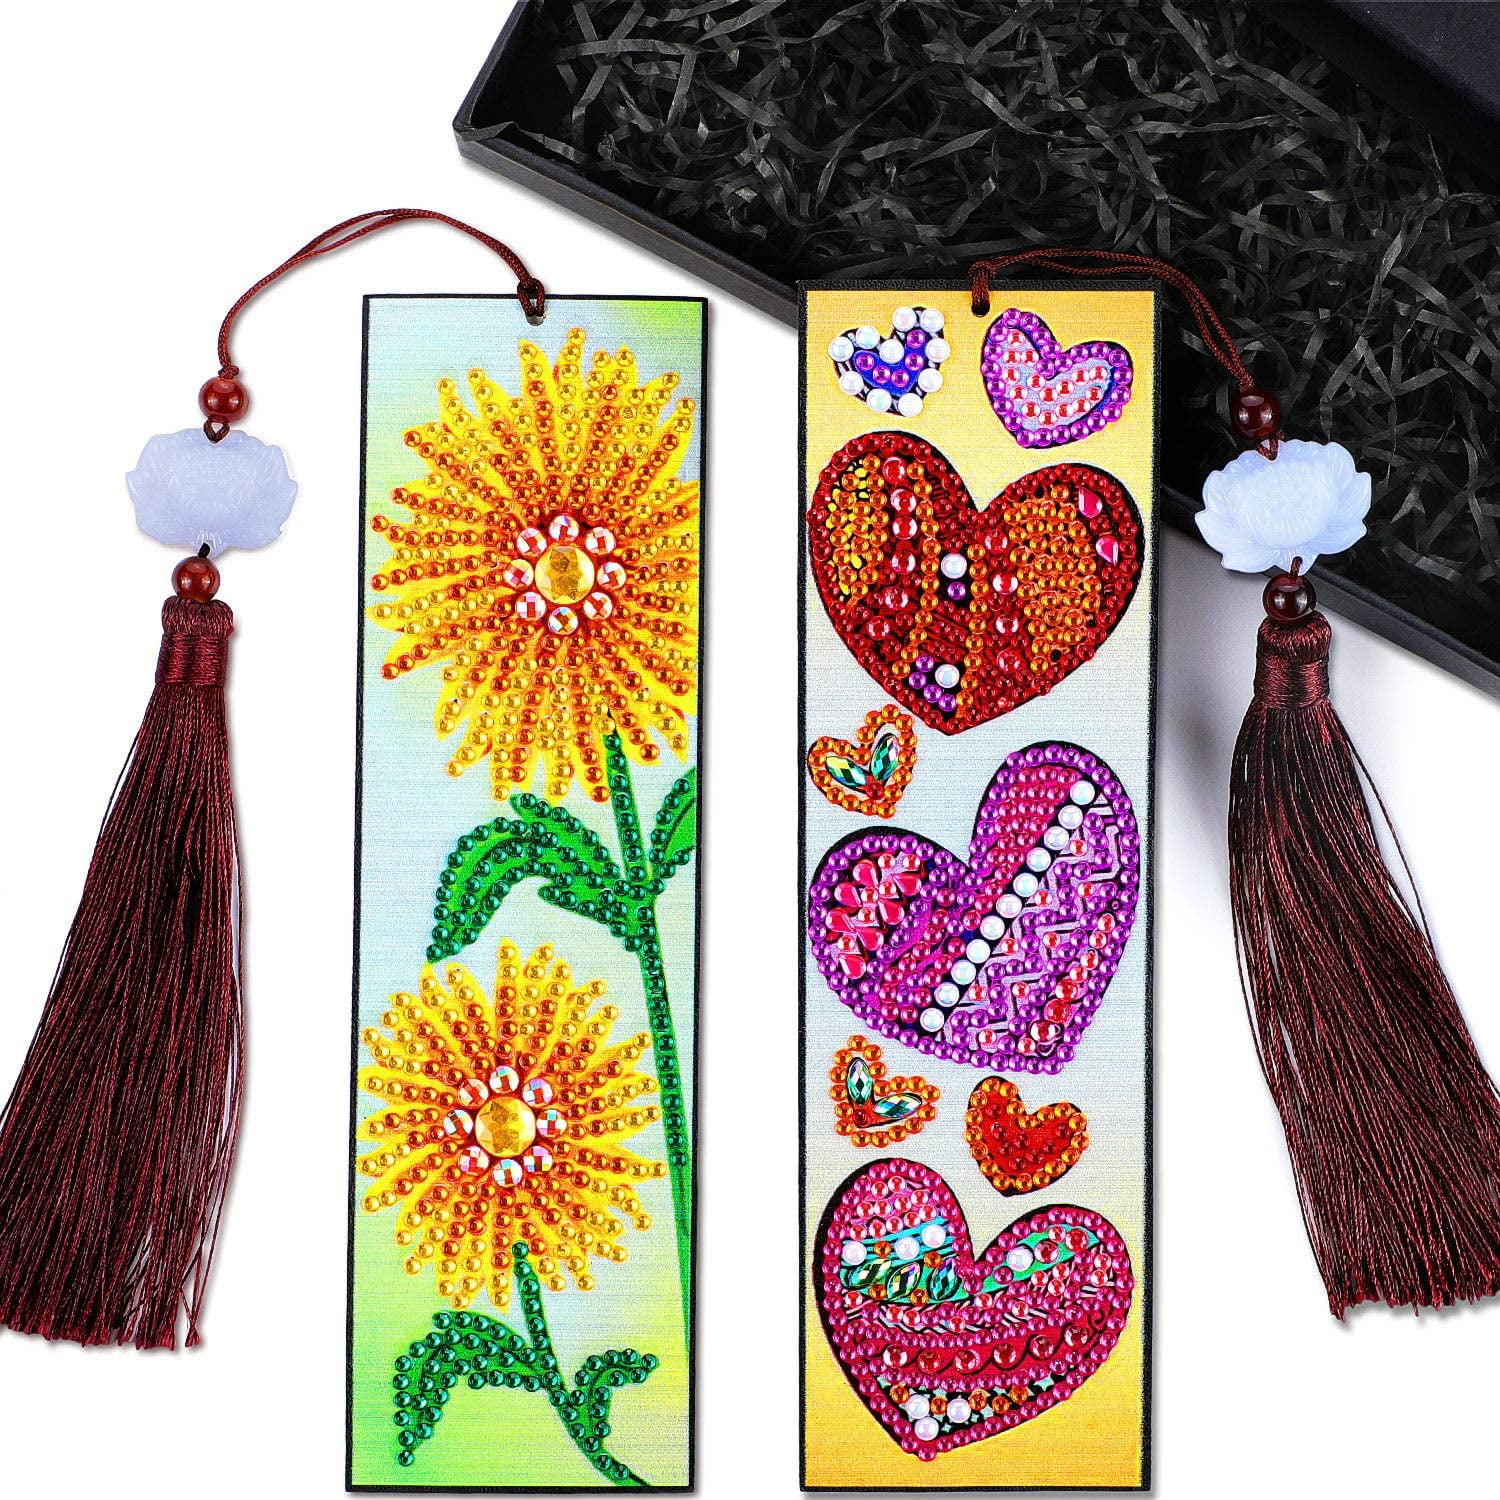 pack Of 2) Vetpw Diamond Embroidery Bookmarks Kit With Leather